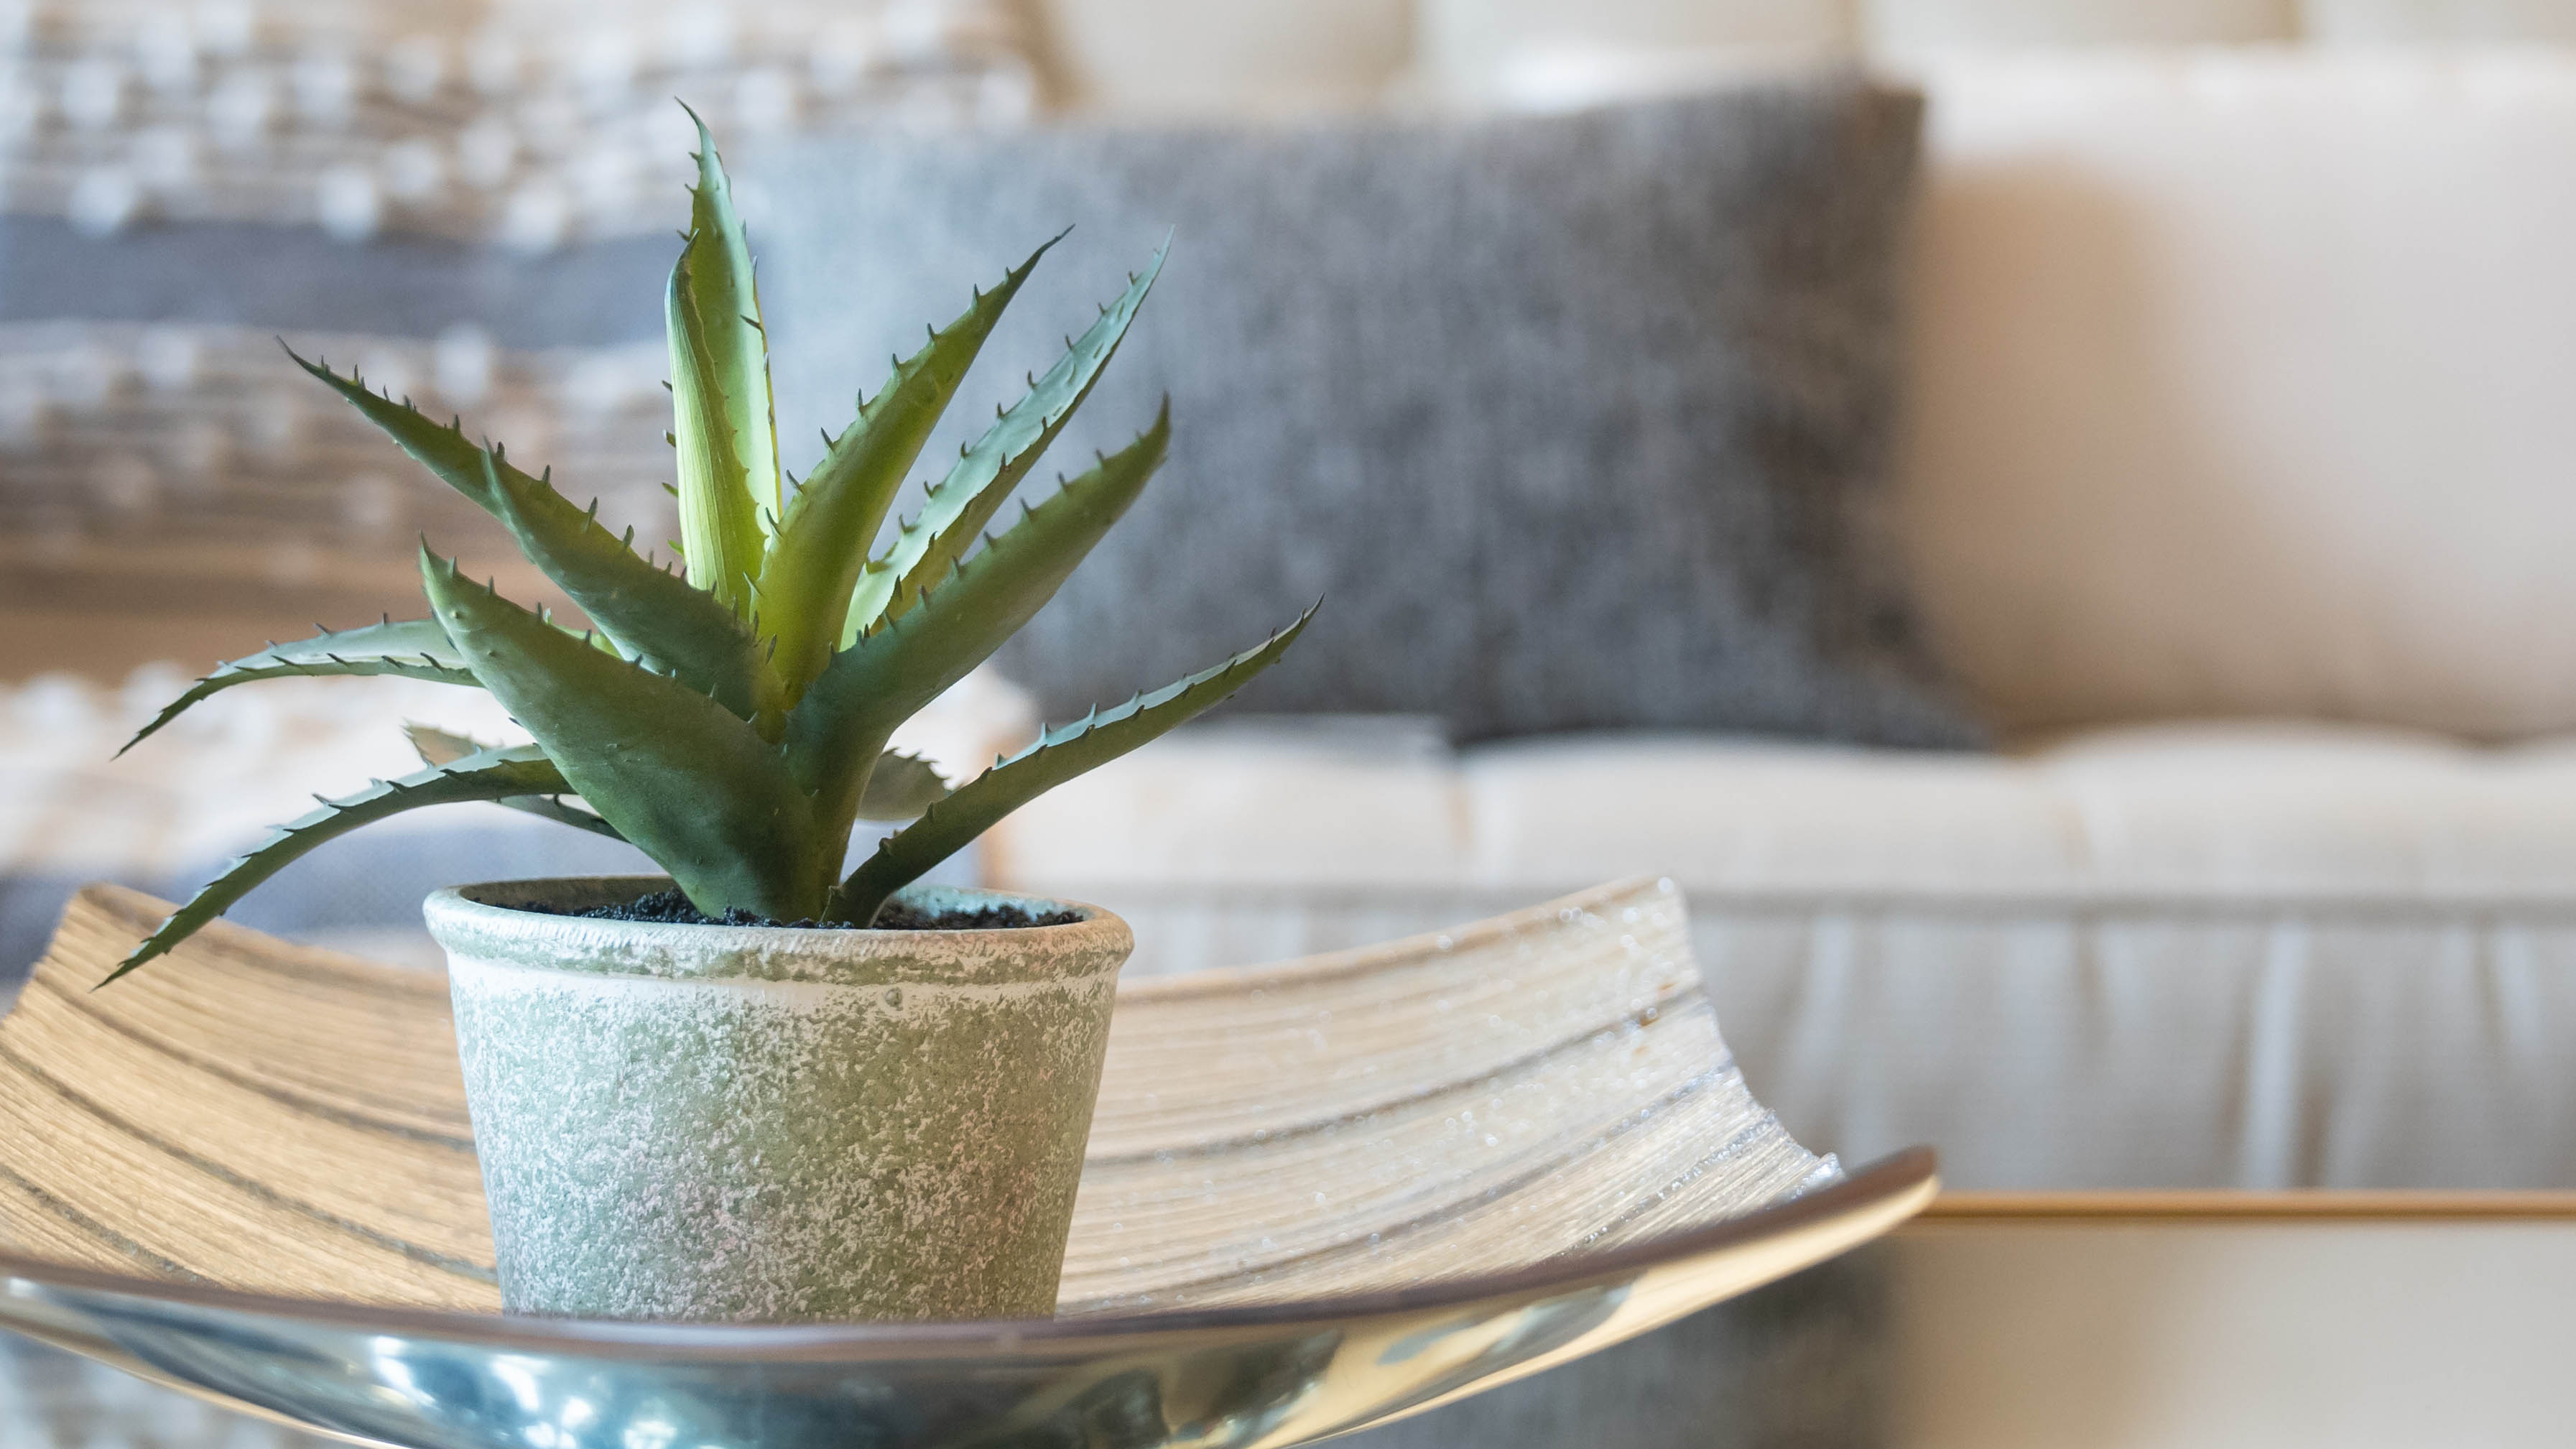 An aloe vera plant on a decorative dish next to a couch